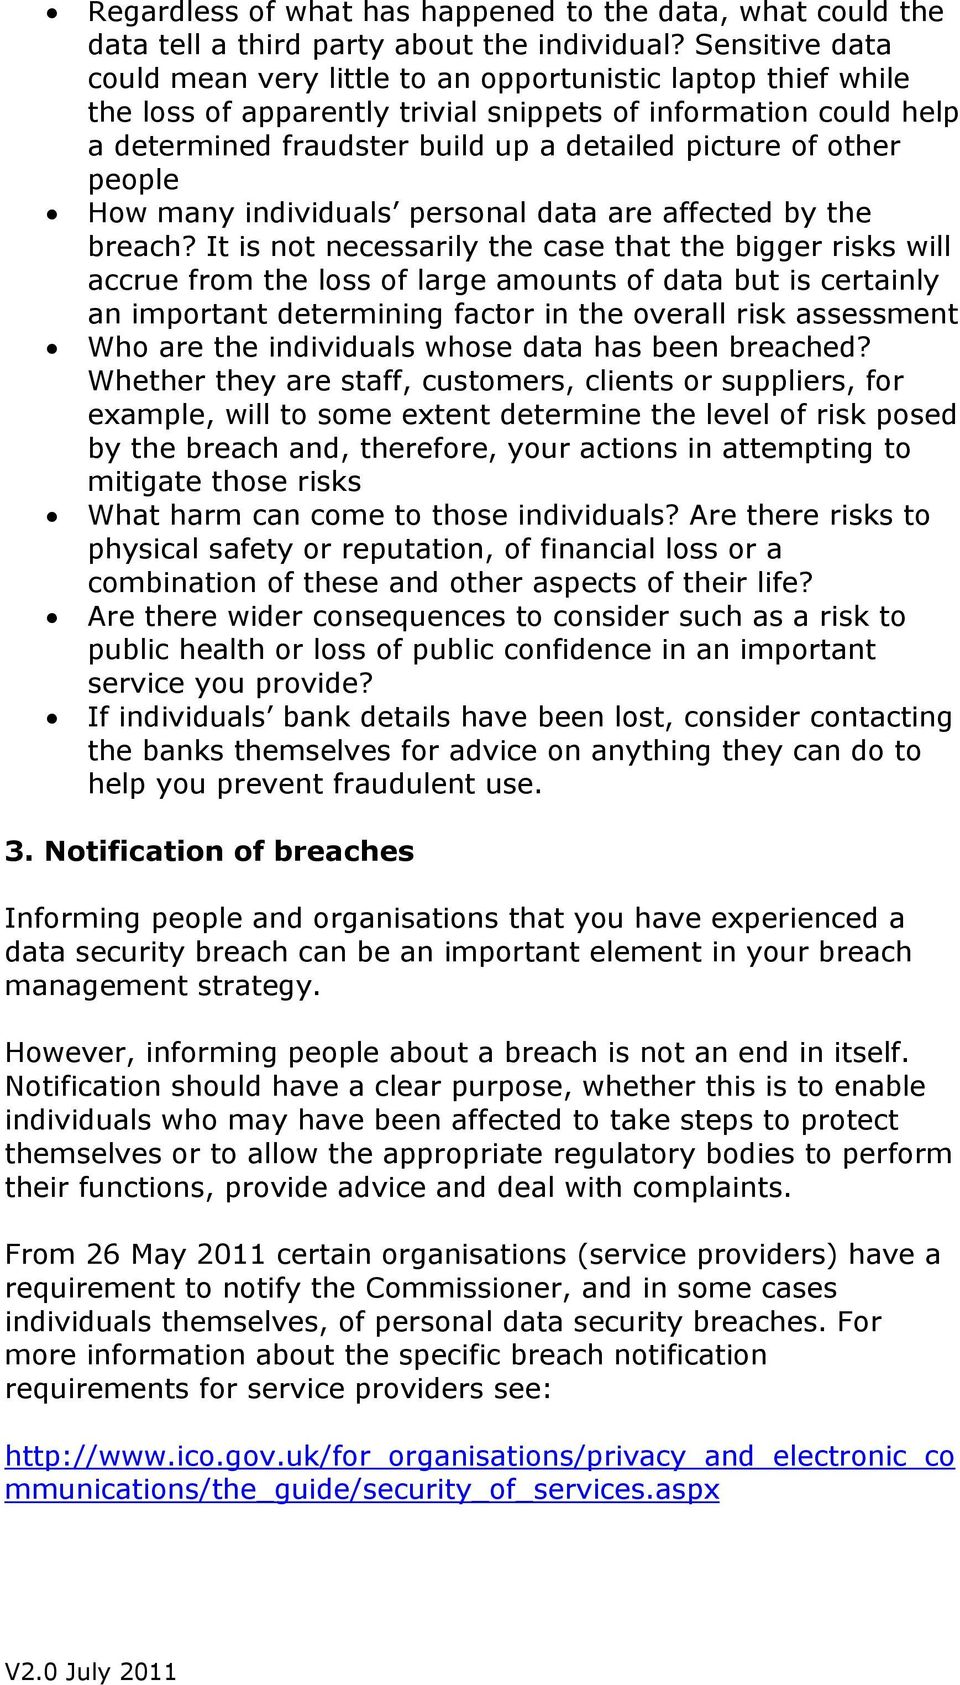 other people How many individuals personal data are affected by the breach?